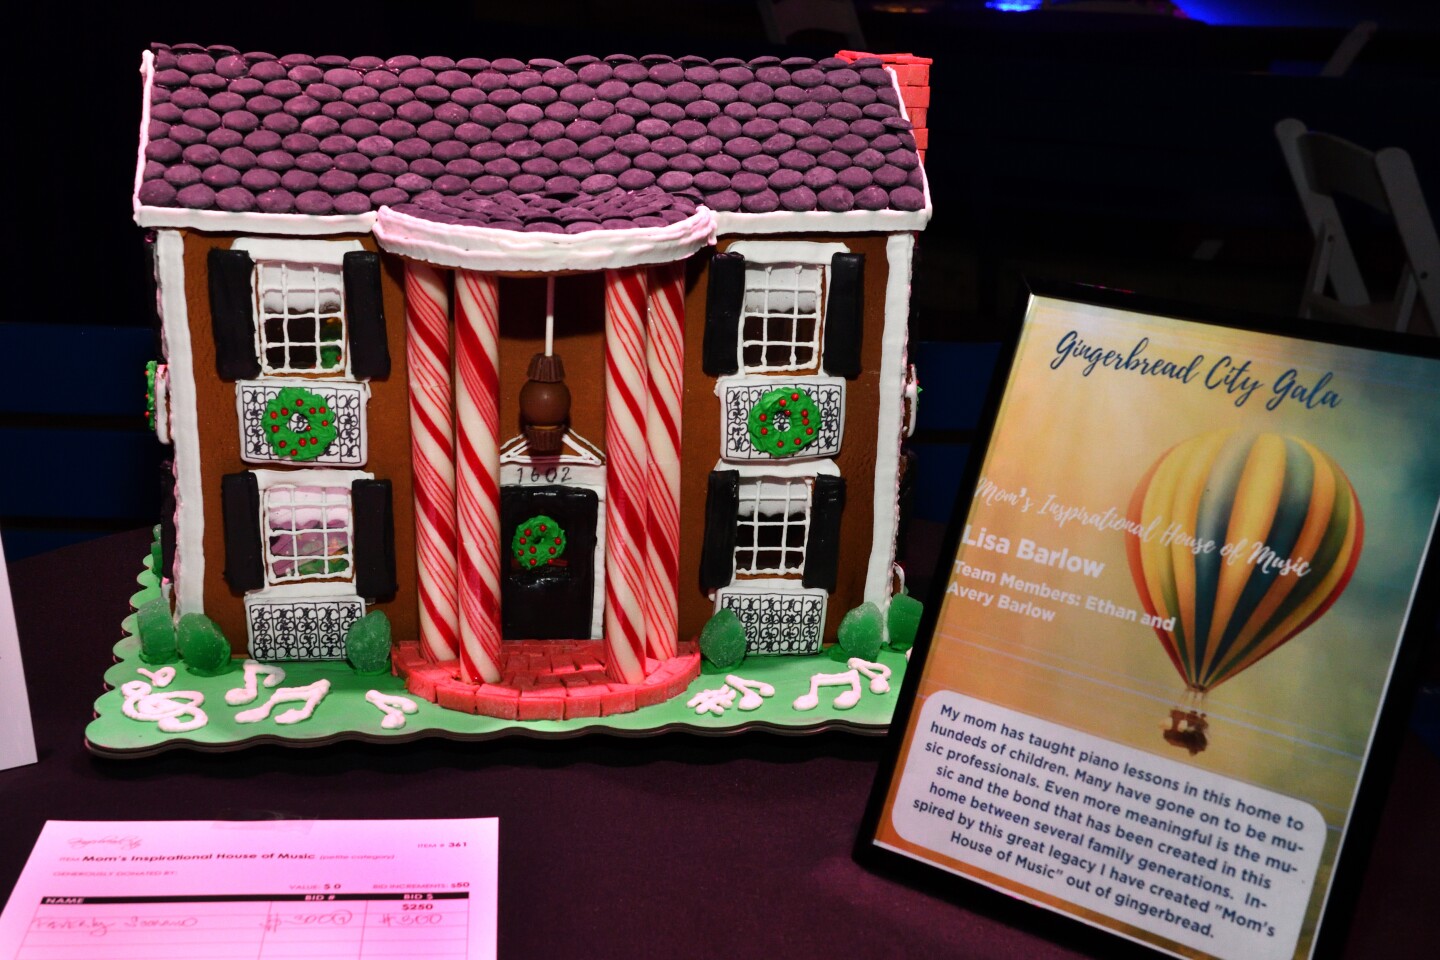 "Mom's Inspirational House of Music" by Lisa Barlow won in the Petite category of the "Gingerbread City 2021" competition.